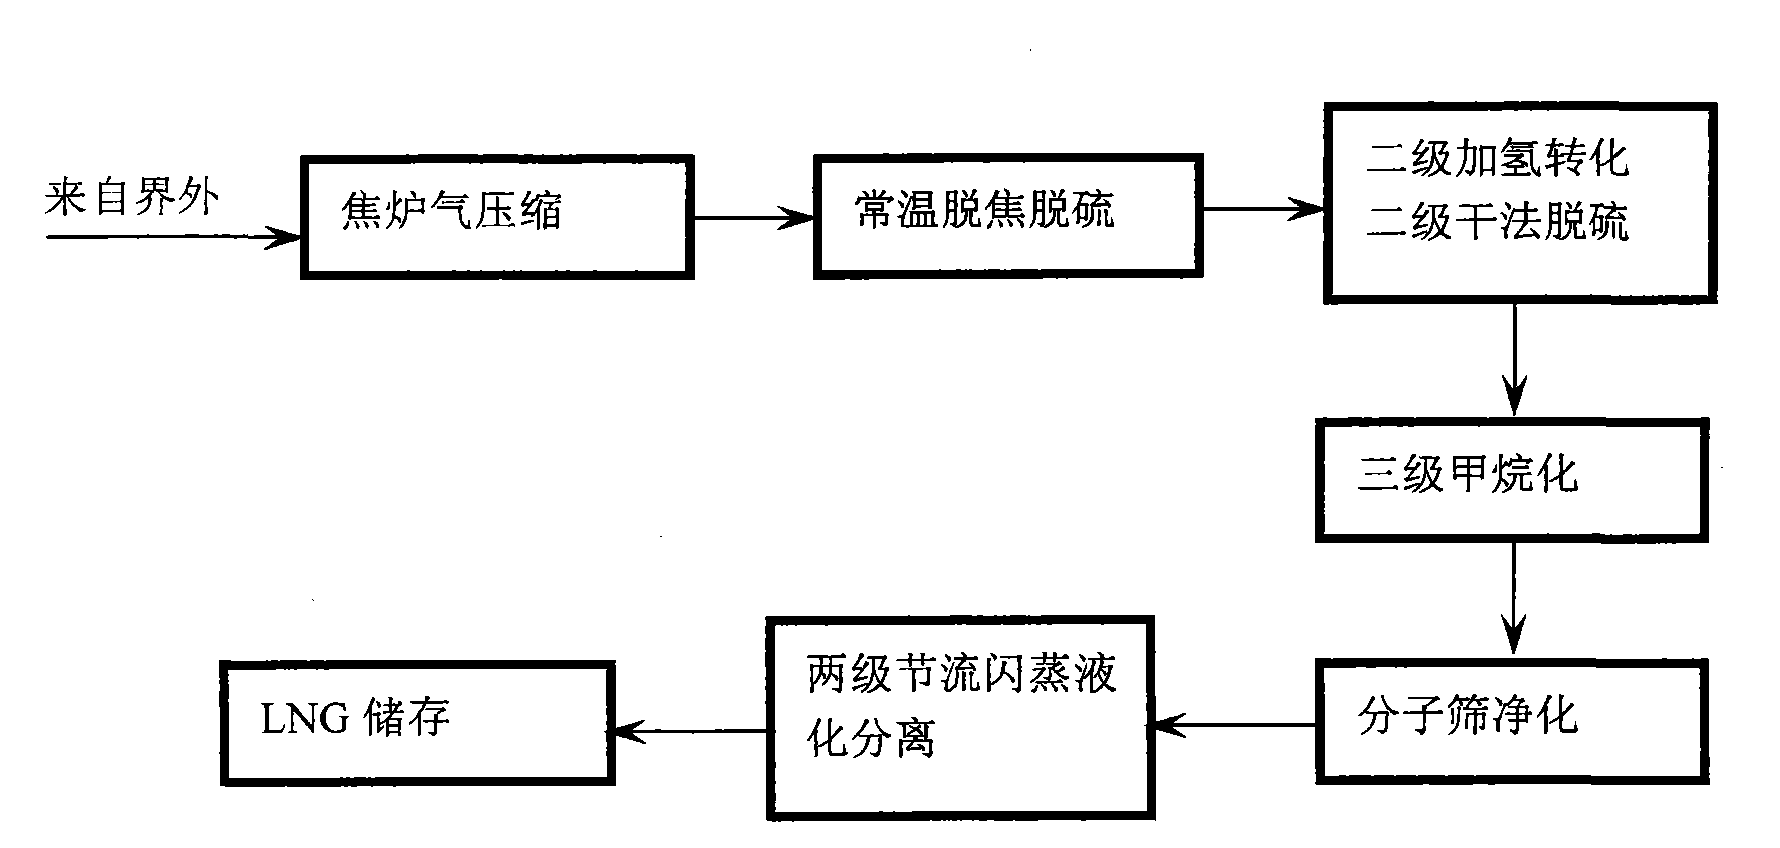 Process method for preparing LNG from coke oven tail gas